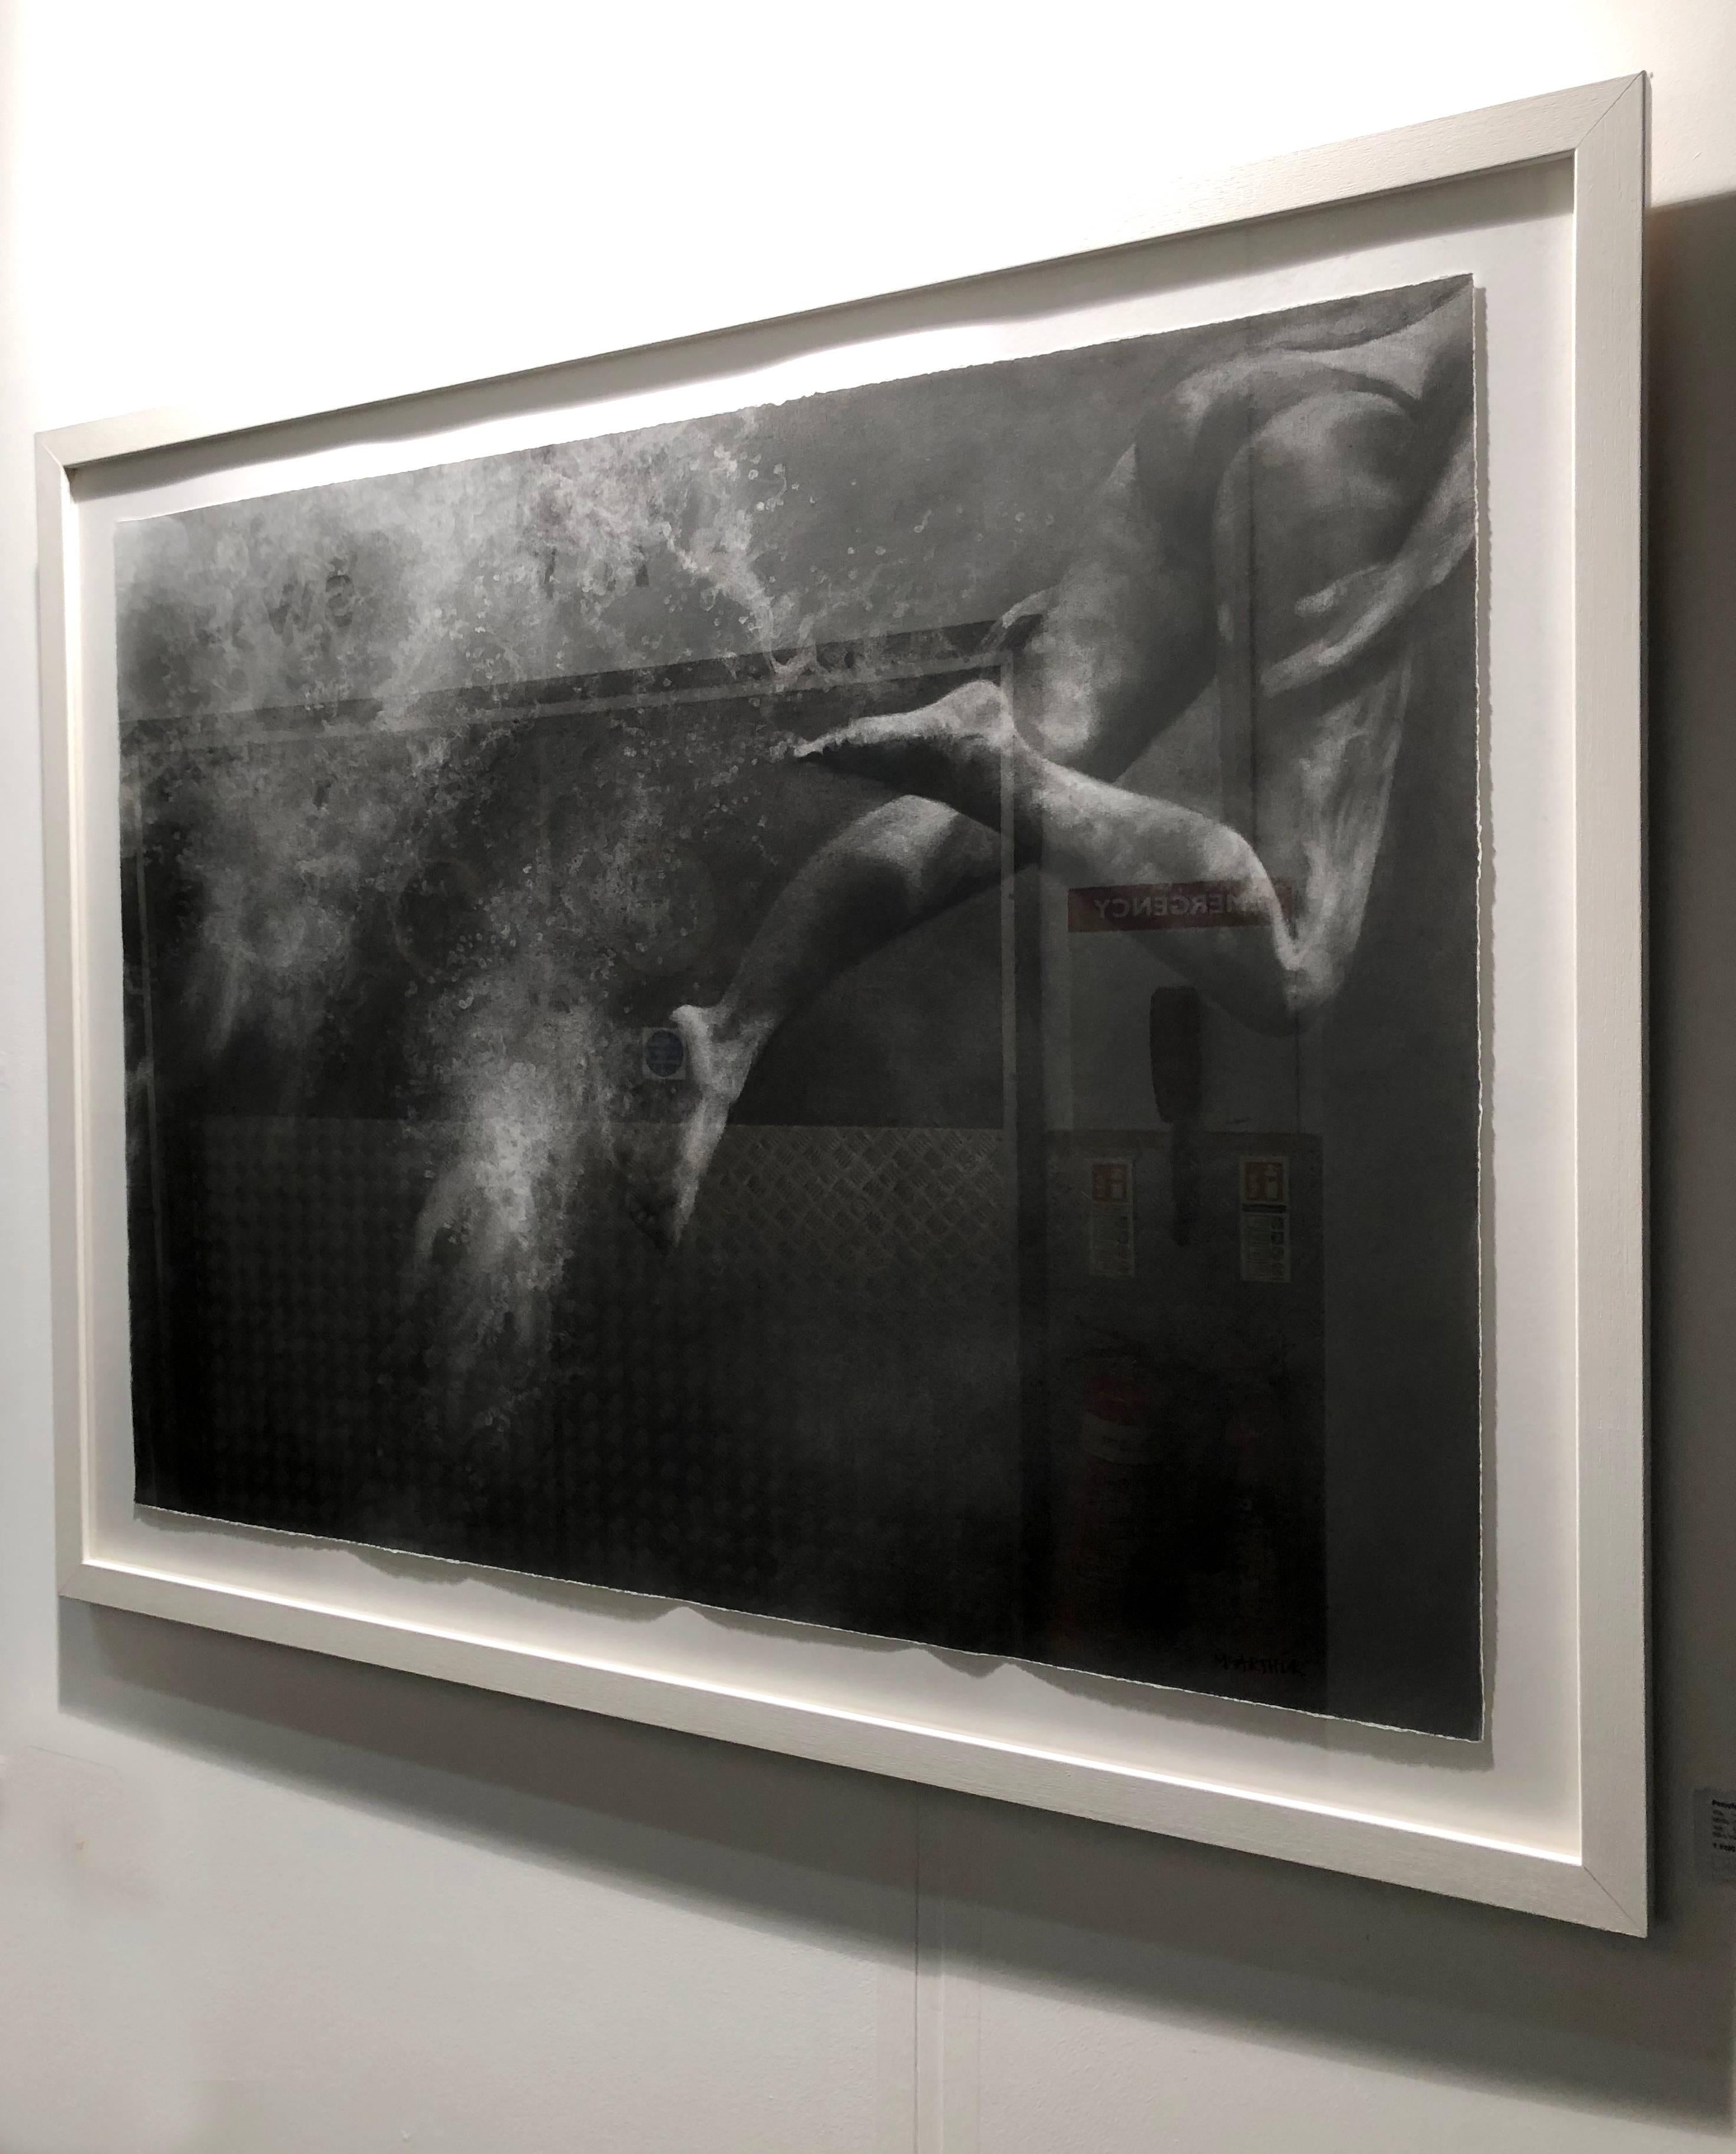 Heaven Bound by Patsy McArthur, charcoal on paper swimmer - white box frame  3